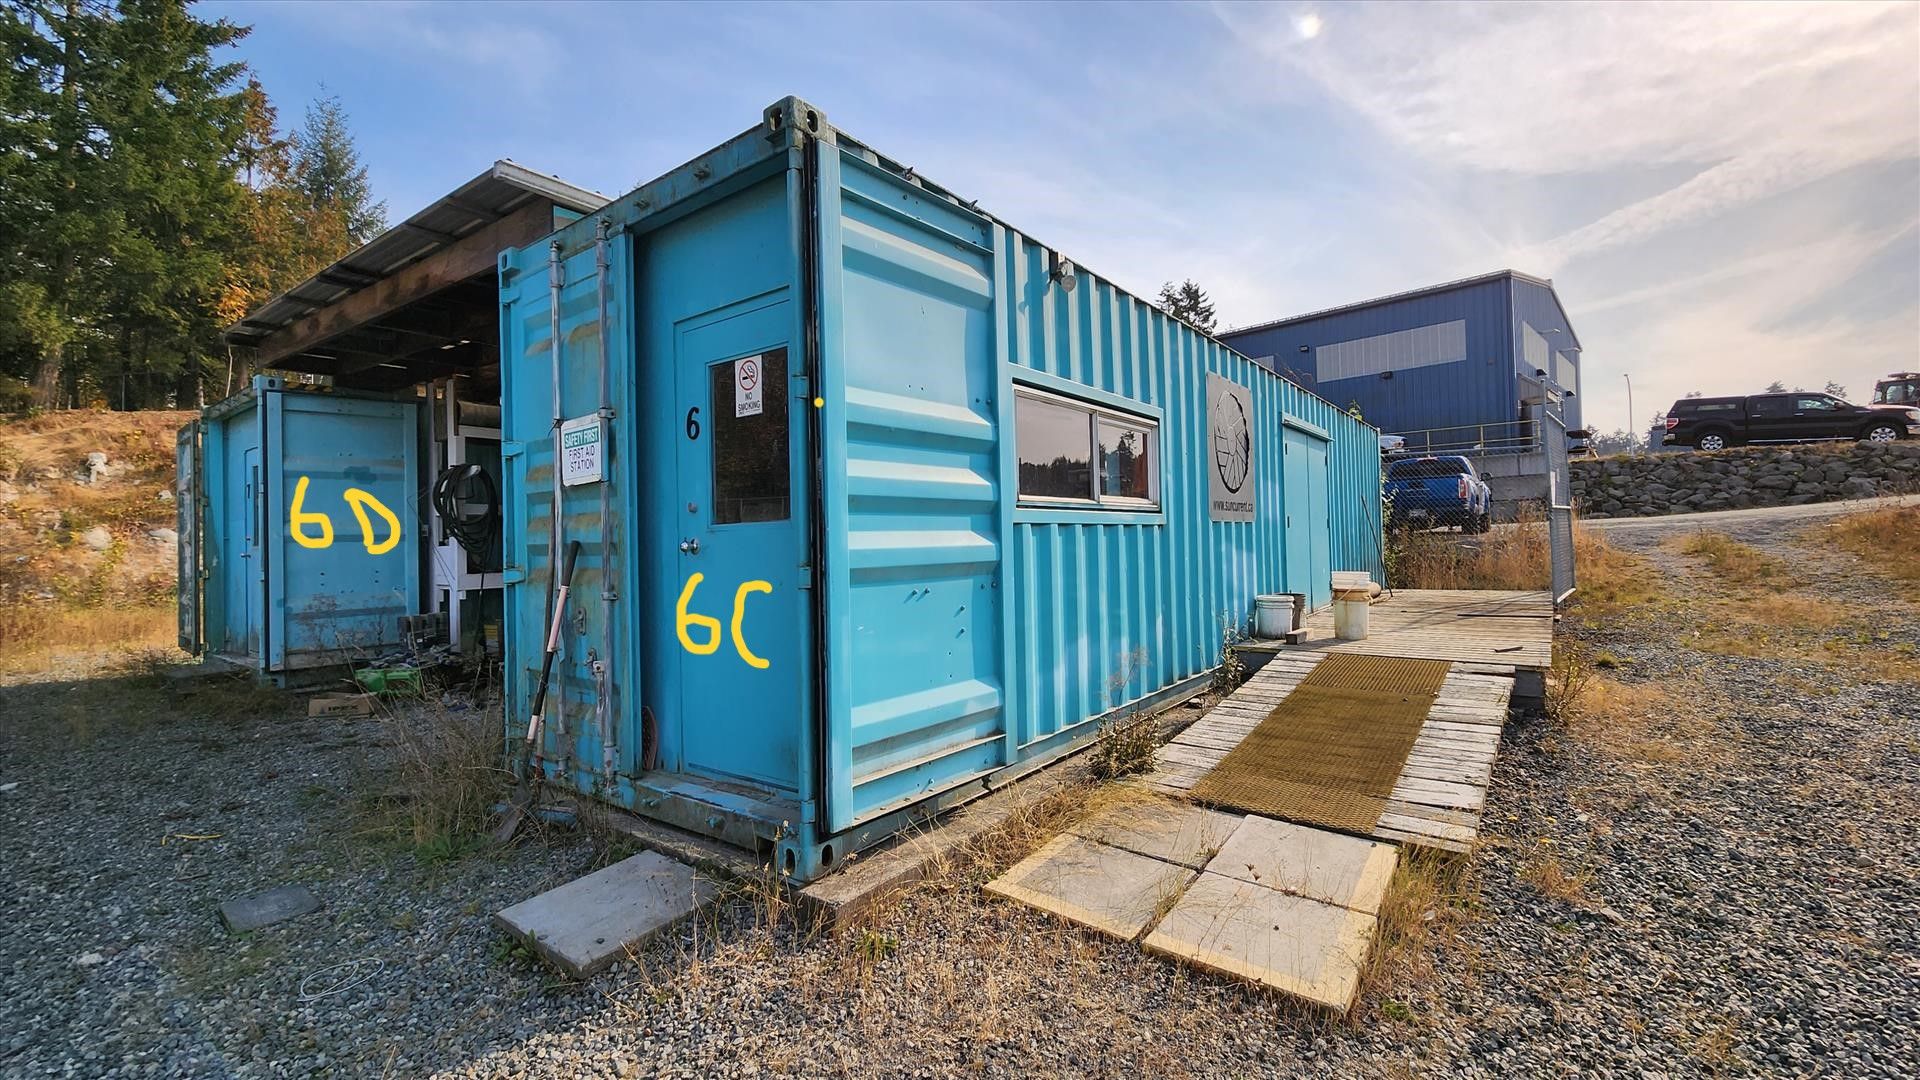 40 ft Sea Container (excluding contents) (Subject to confirmation. The winner will be determined